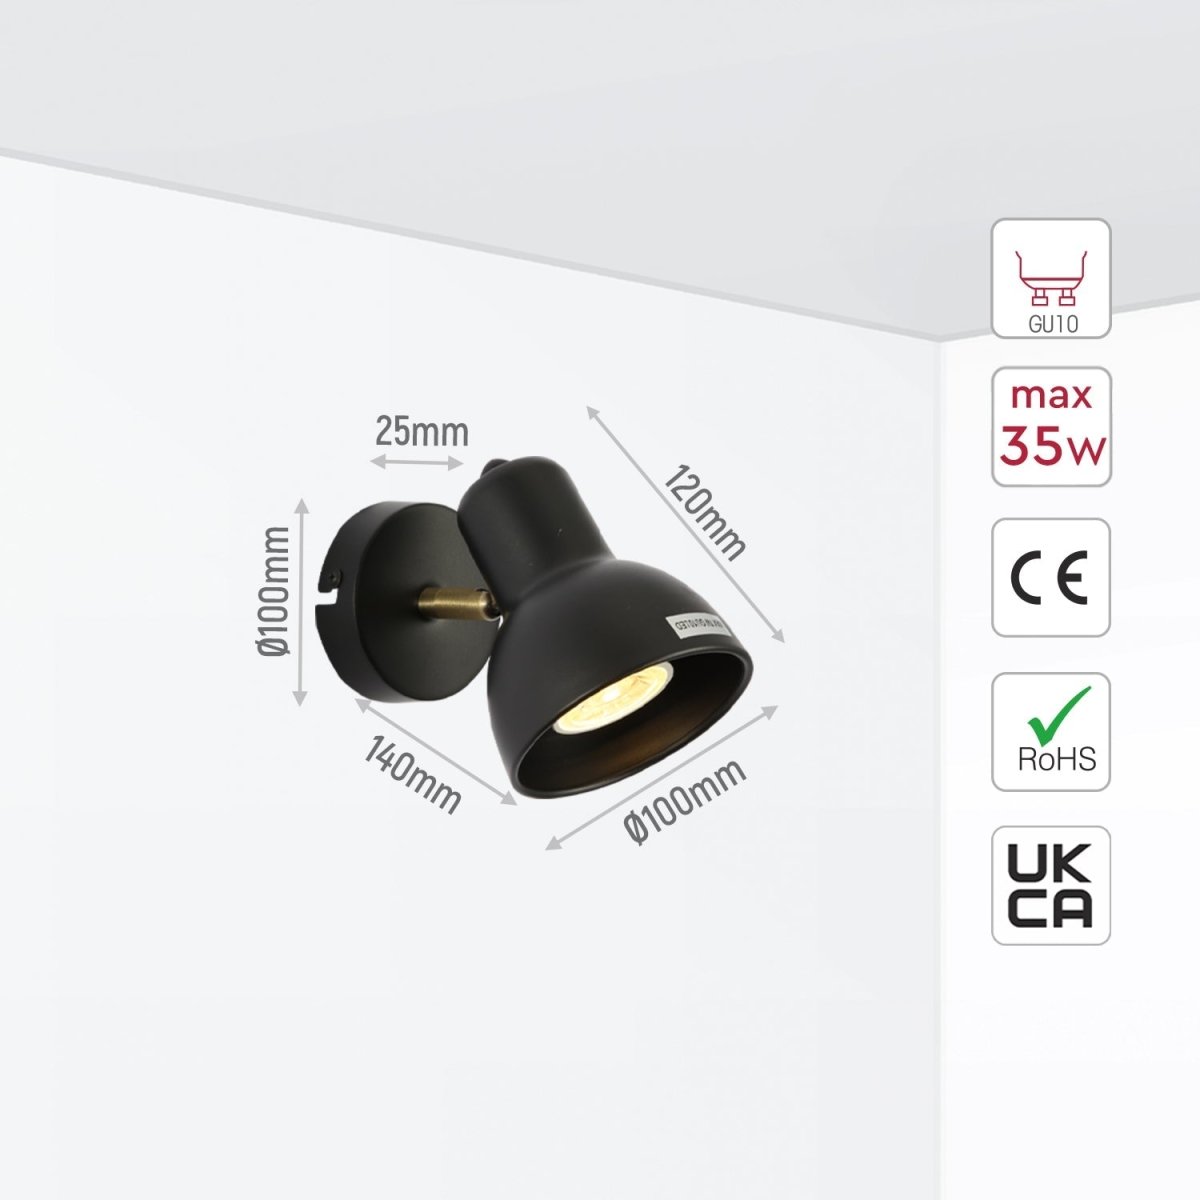 Size and specs of 1 Way Hektor Spotlight with GU10 Fitting Antique Brass Black | TEKLED 172-03126